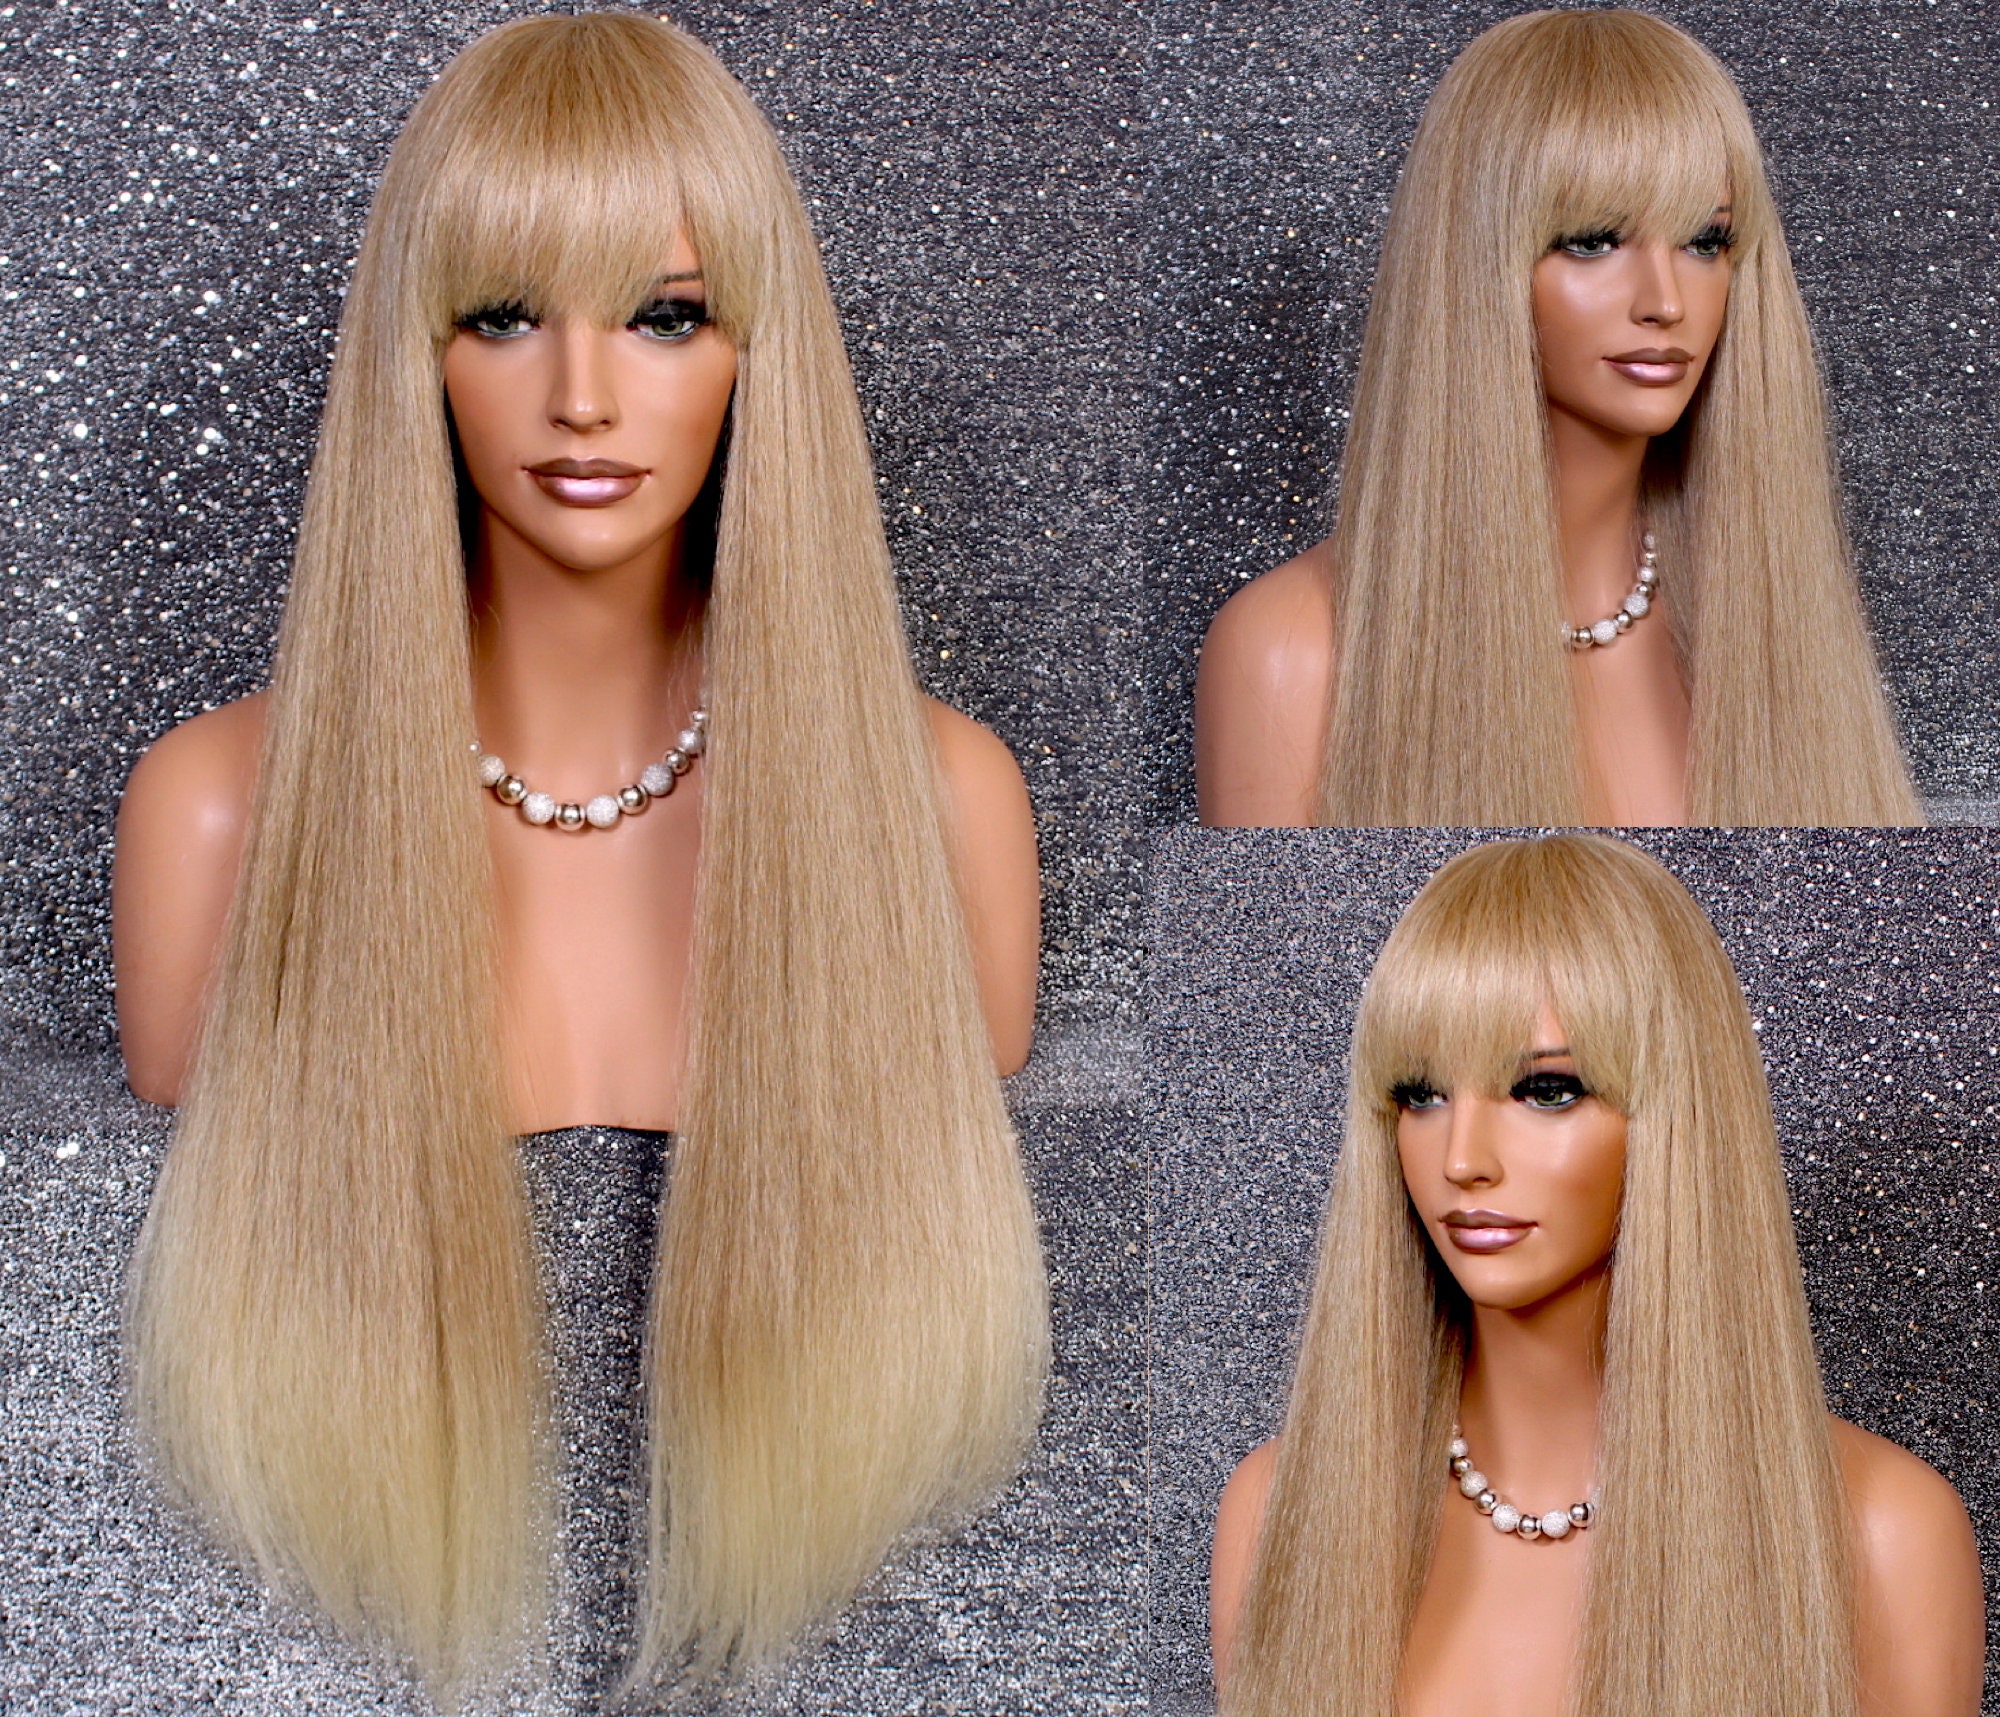 Human Hair Blend Body Crimpted Textured Long Blunt Bangs & Length Blonde Mix Heat Safe Wig Cancer/Alopecia/Cosplay